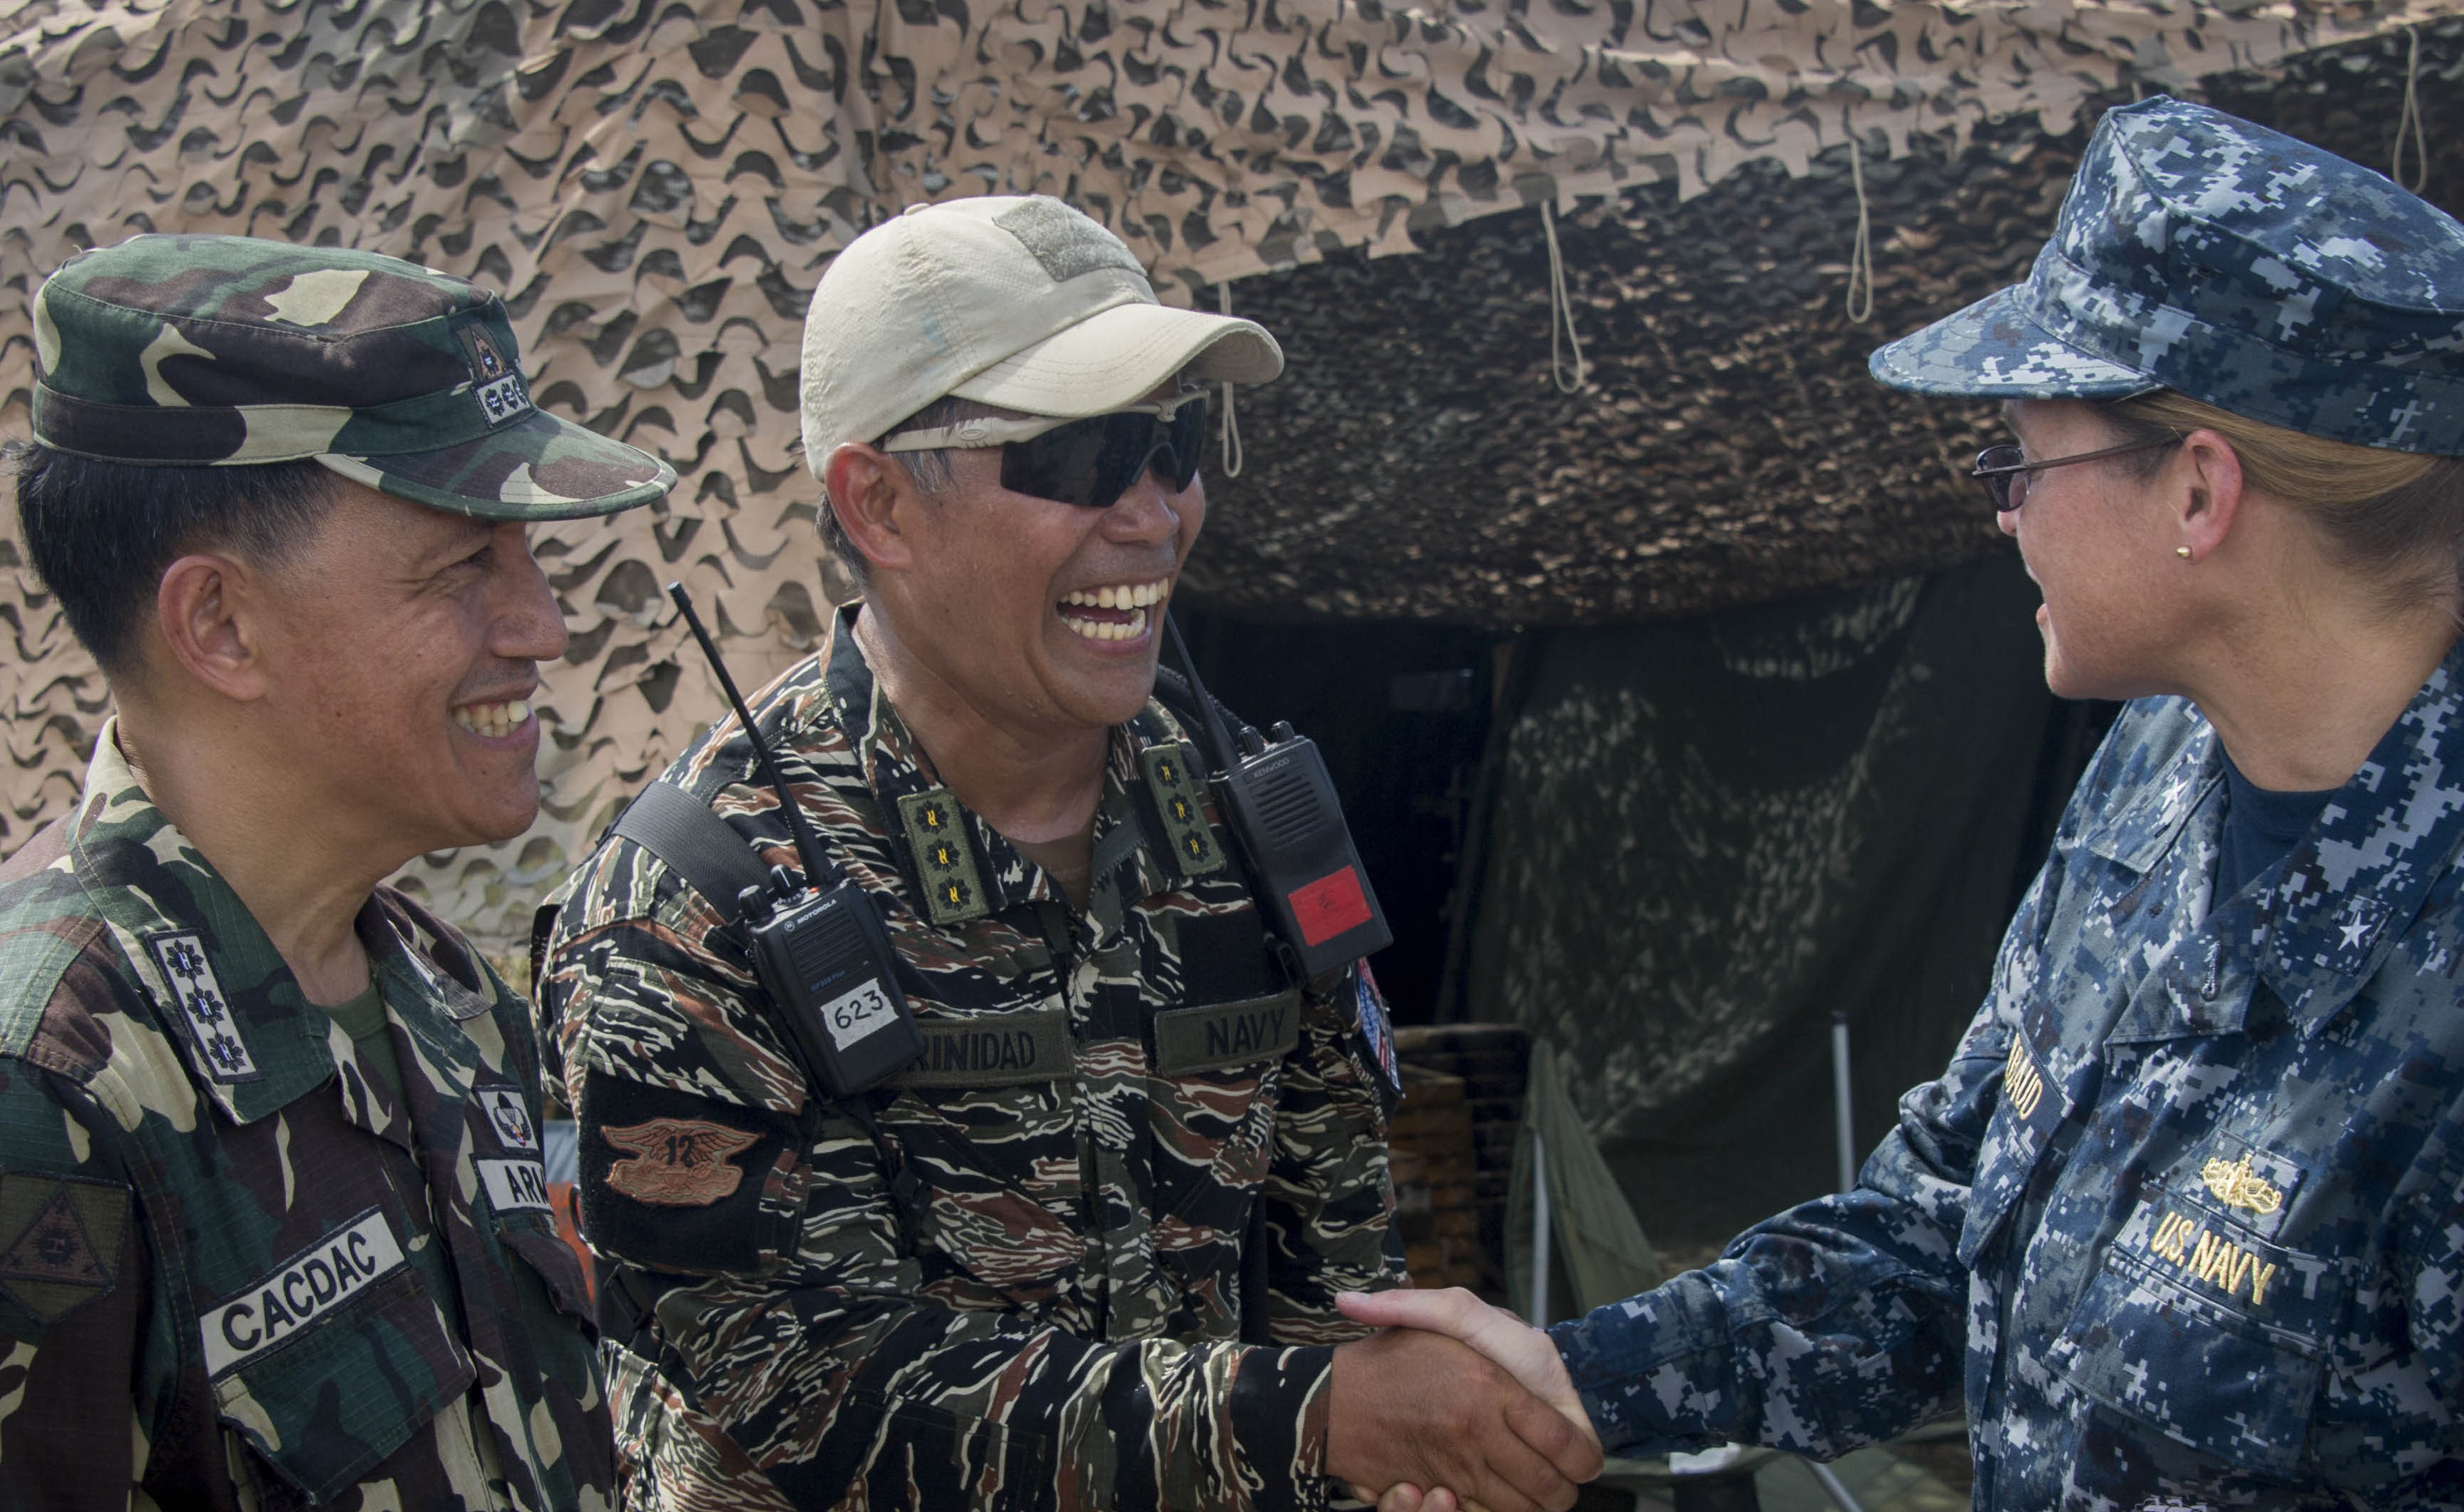 U.S. Navy and Philippine military officials during the humanitarian aid and disaster relief operation in Tacloban in 2013. US Navy Photo